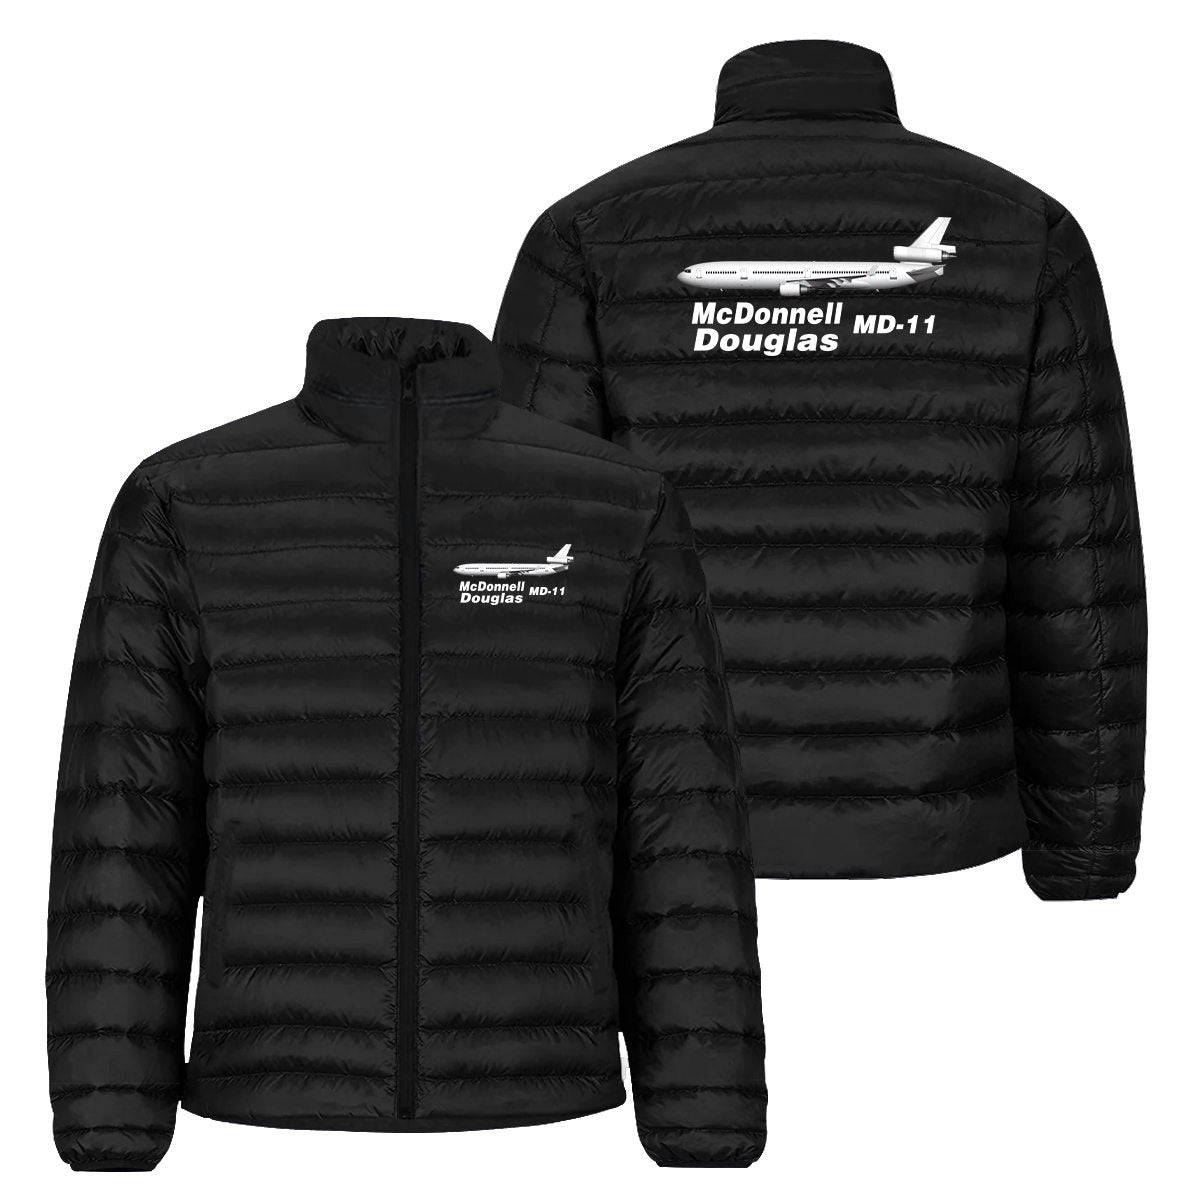 The McDonnell Douglas MD-11 Designed Padded Jackets